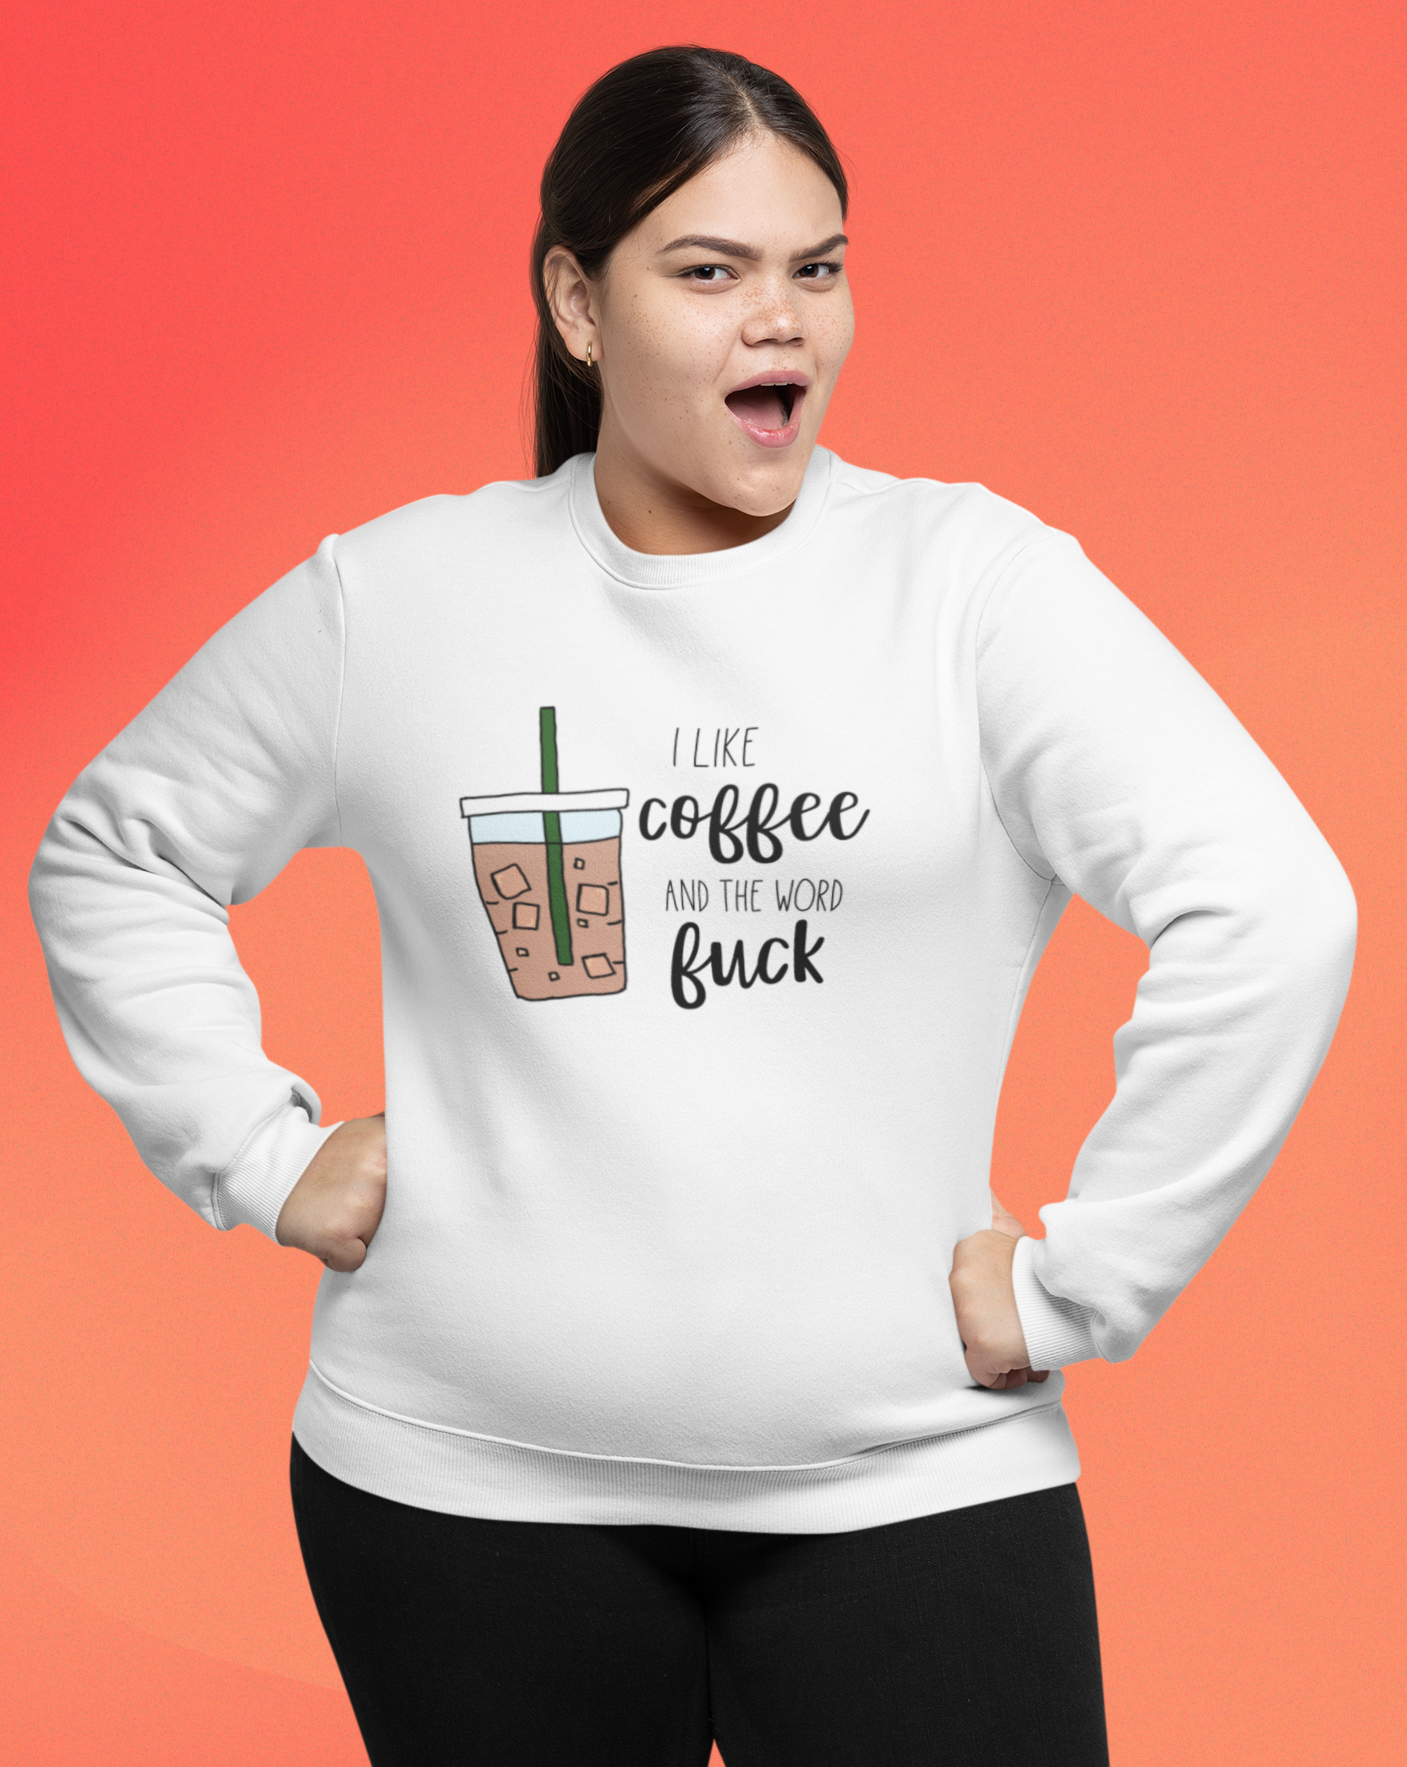 I like coffee and the word fuck. This crewneck sweatshirt is for those of us that are classy but cuss a little, and run on coffee! Perfect for staying cozy while sipping coffee, and maybe even letting an f-bomb slip when it burns your tongue! 